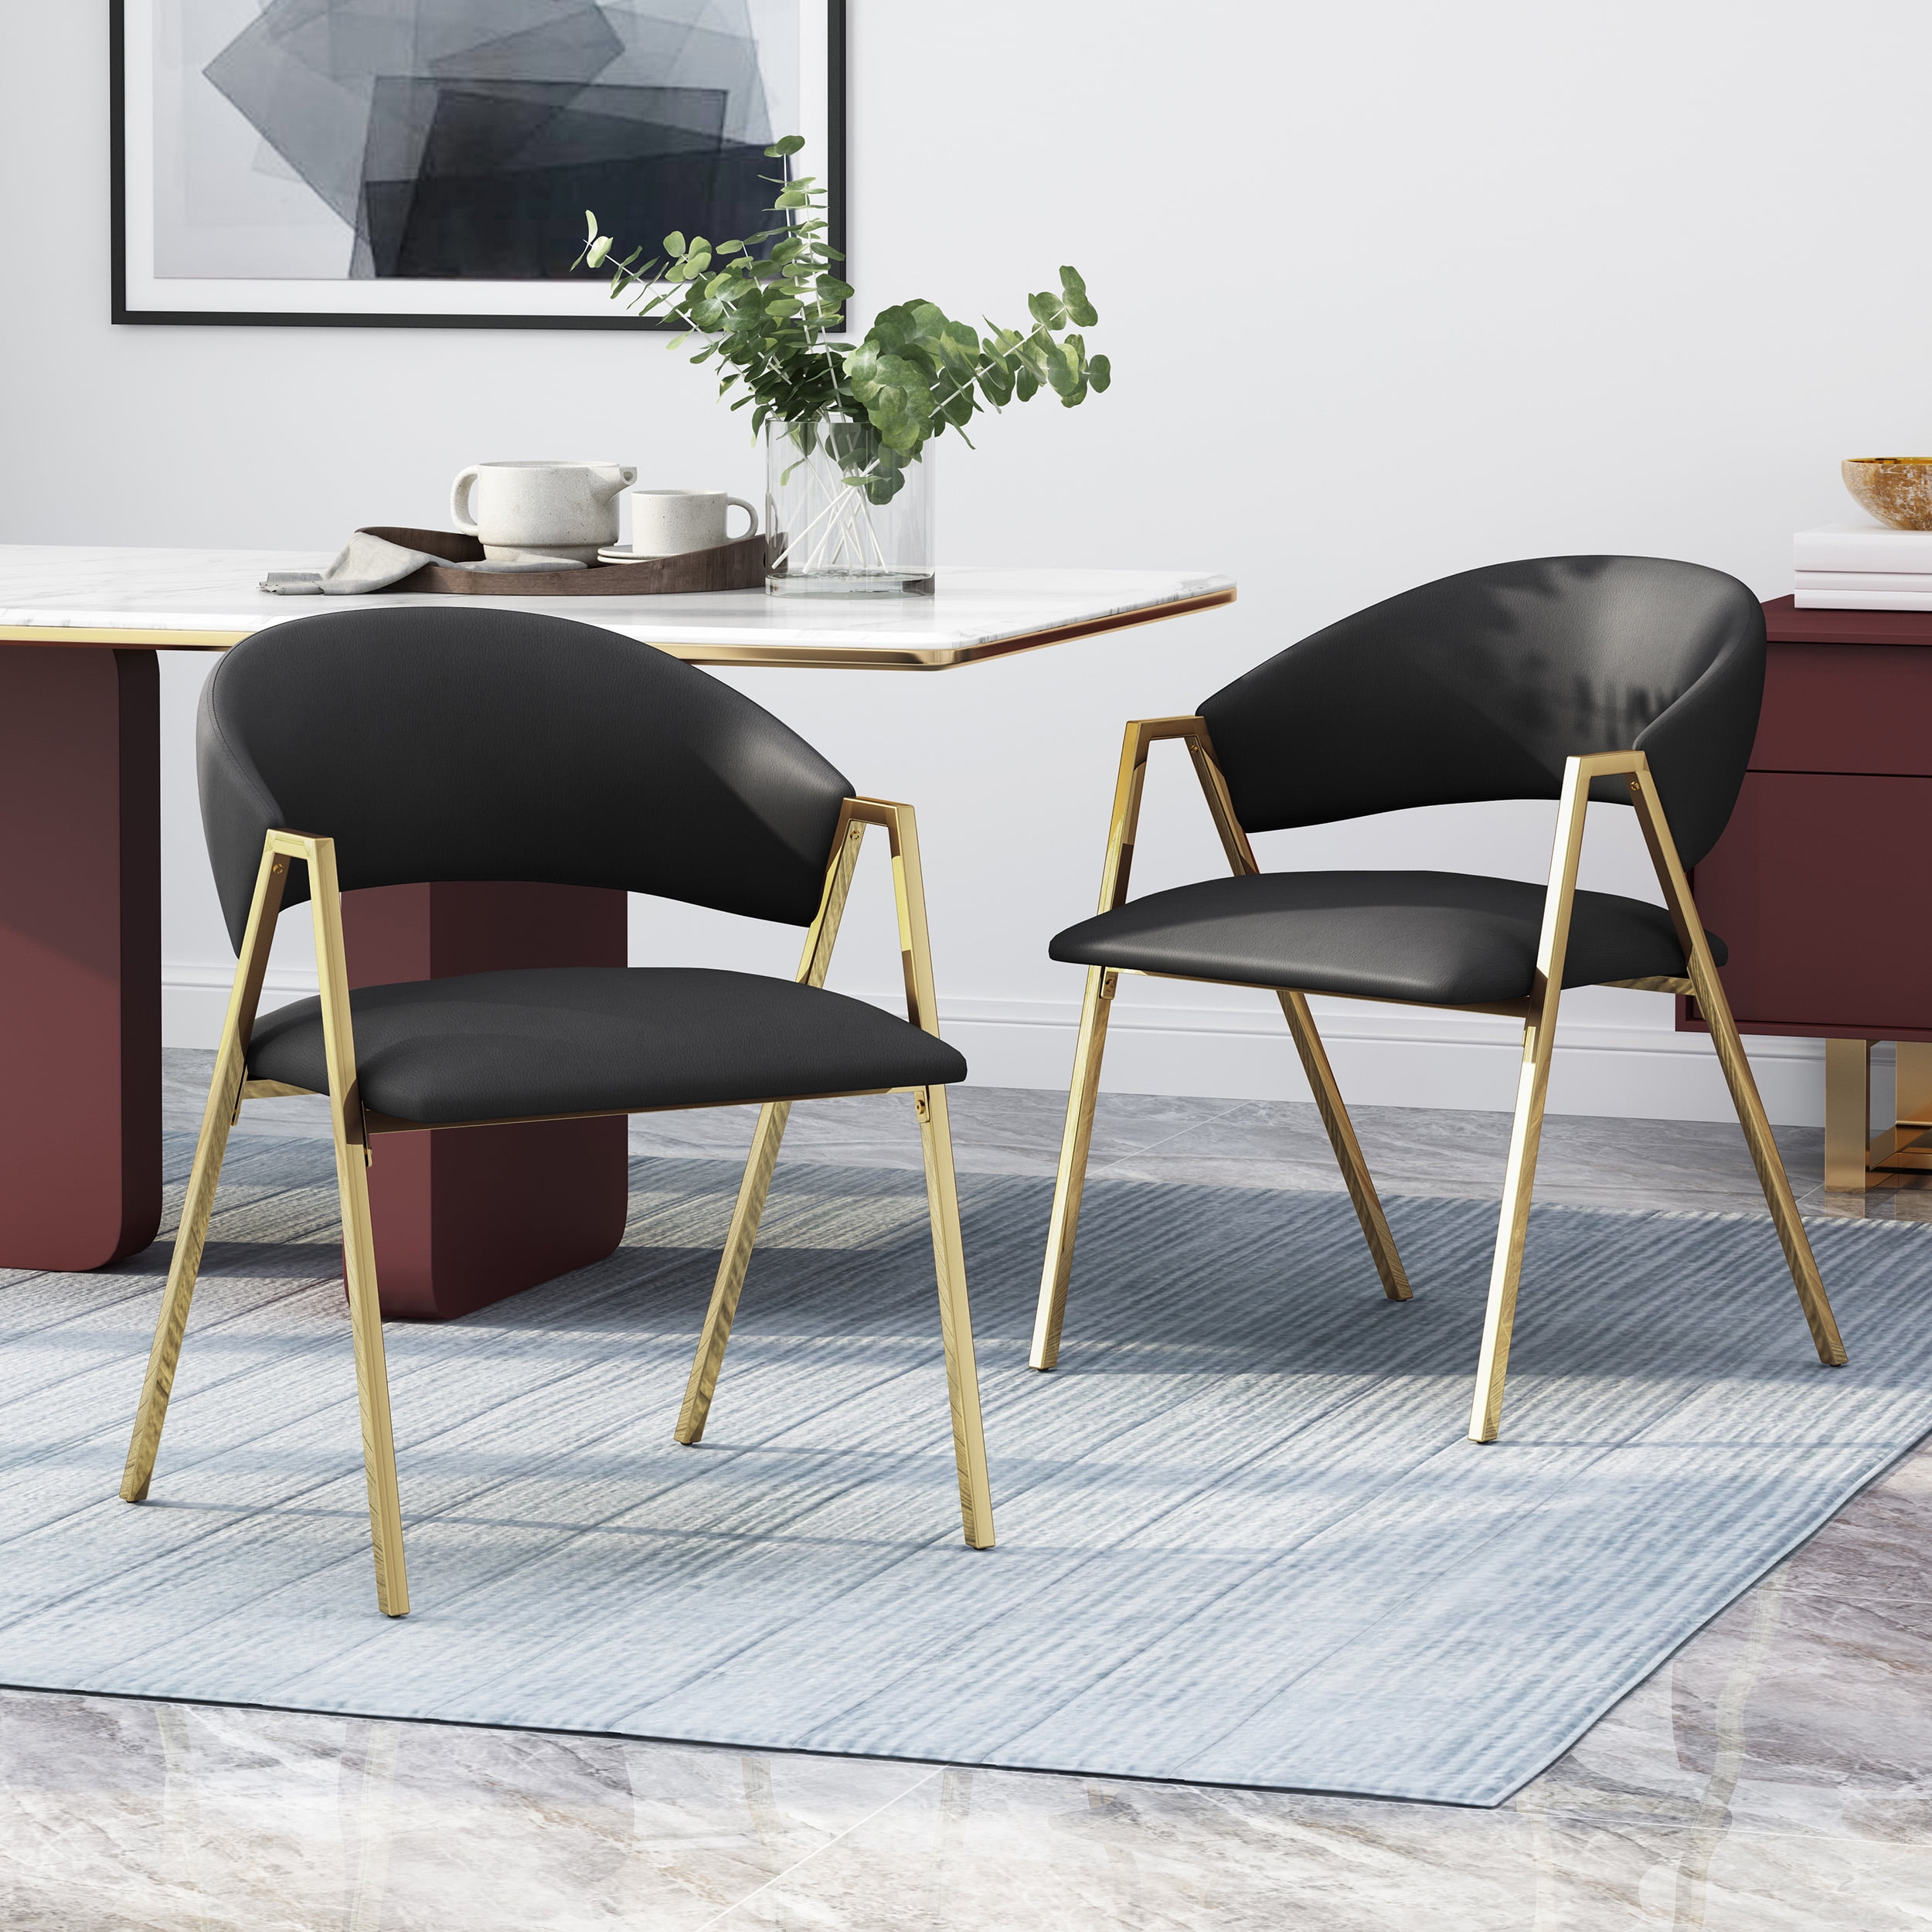 Modern Upholstered Dining Chairs